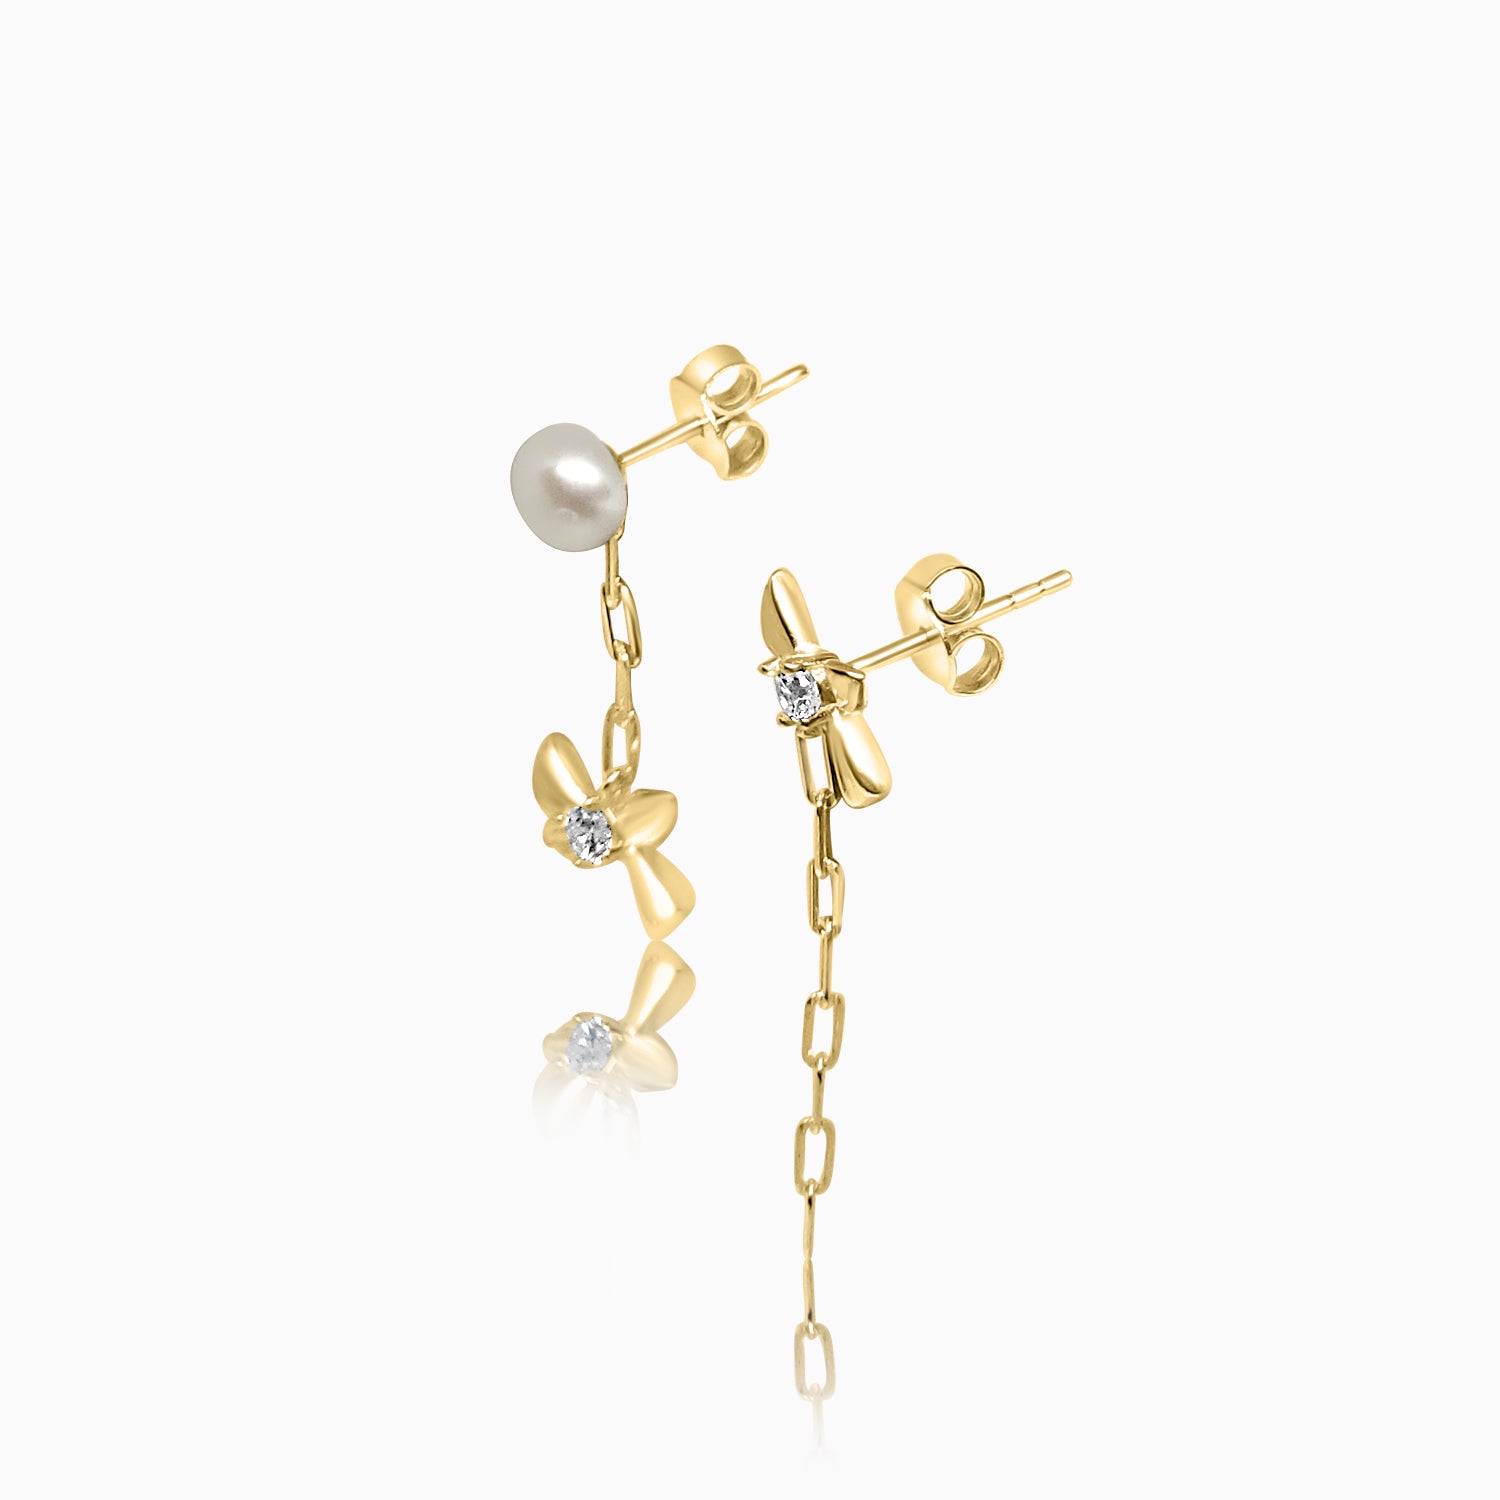 Silver Gold Pearl Linked Little Knot and Chain Earrings